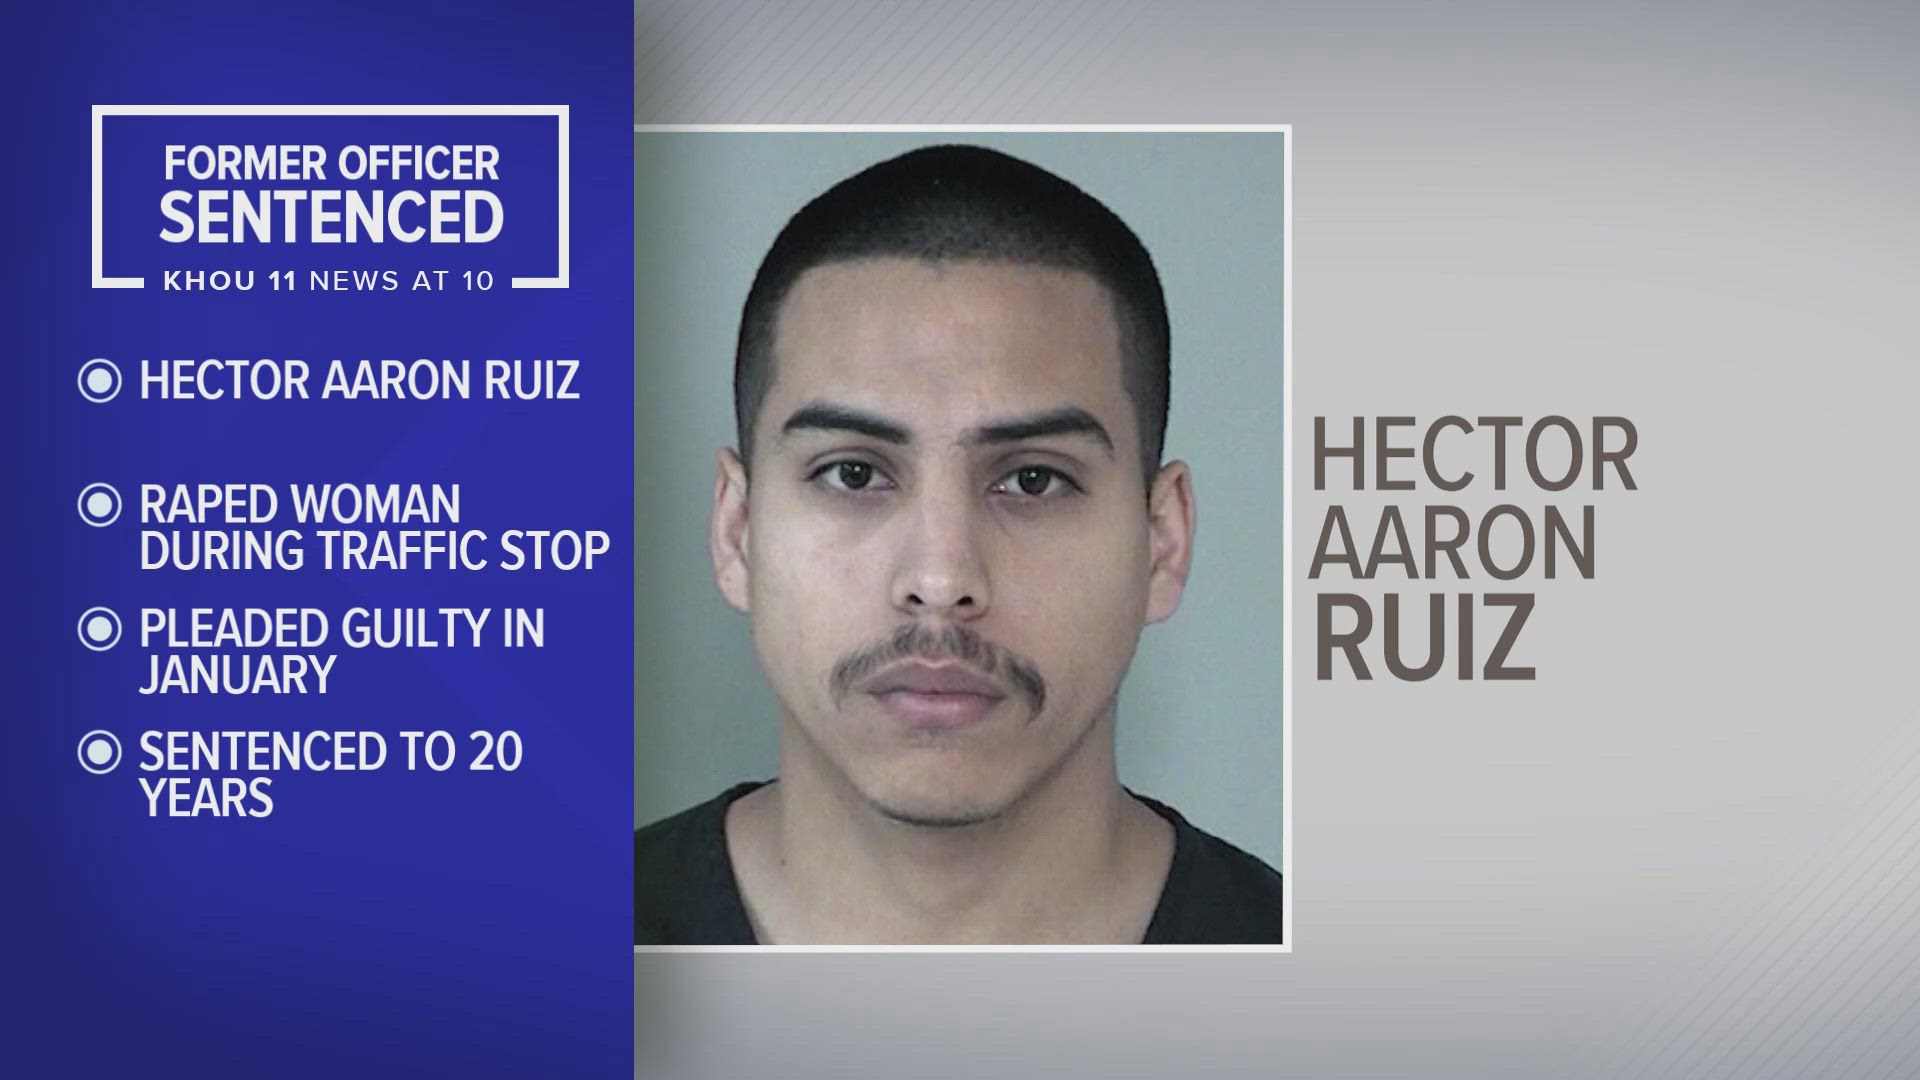 Hector Aaron Ruiz, 29, was sentenced to 20 years in federal prison for raping a woman during a traffic stop in 2019.